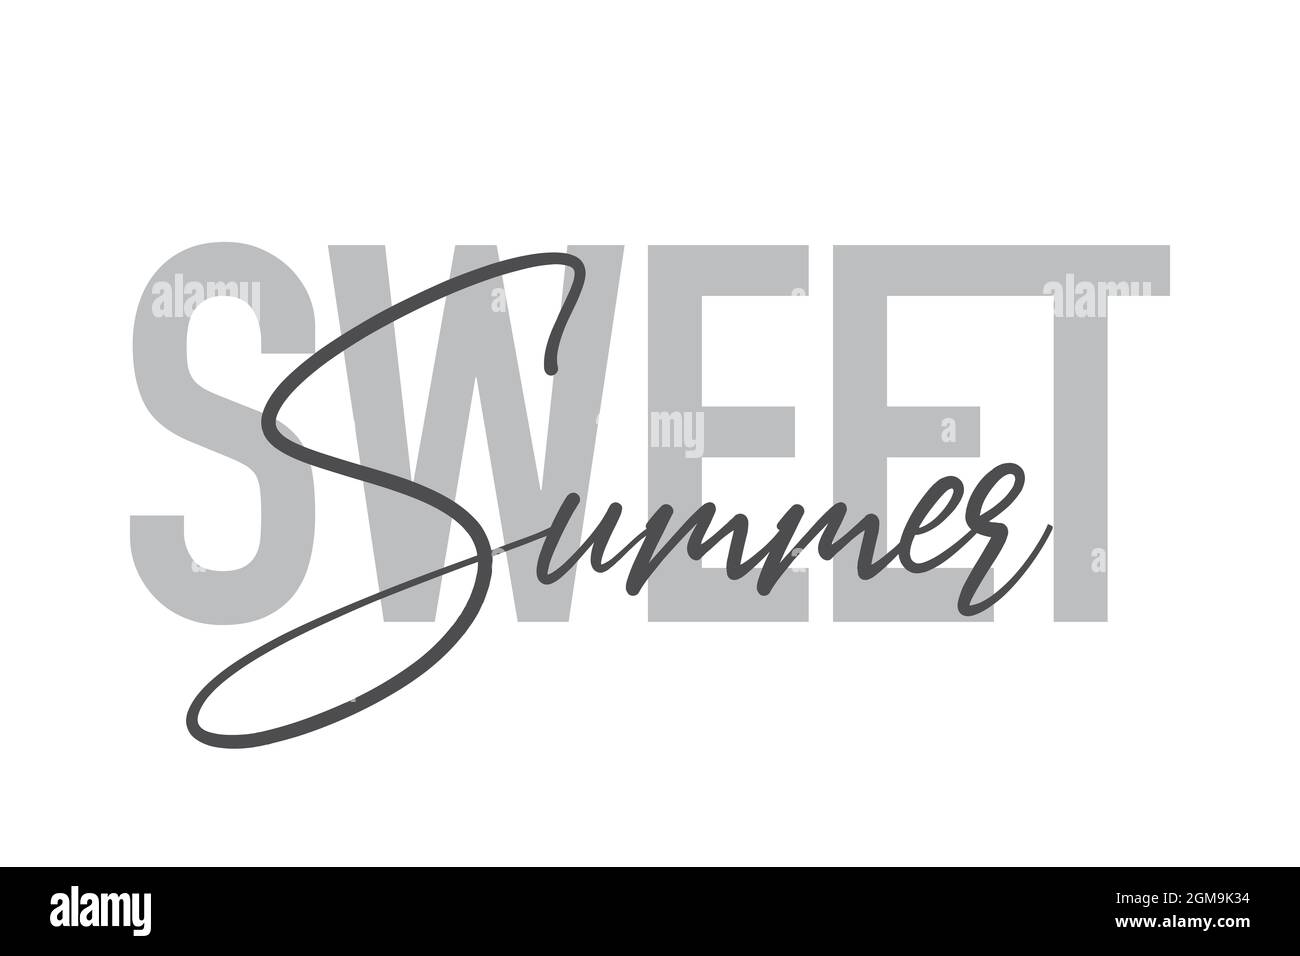 Modern, simple, minimal typographic design of a saying 'Sweet Summer' in tones of grey color. Cool, urban, trendy and playful graphic vector art with Stock Photo